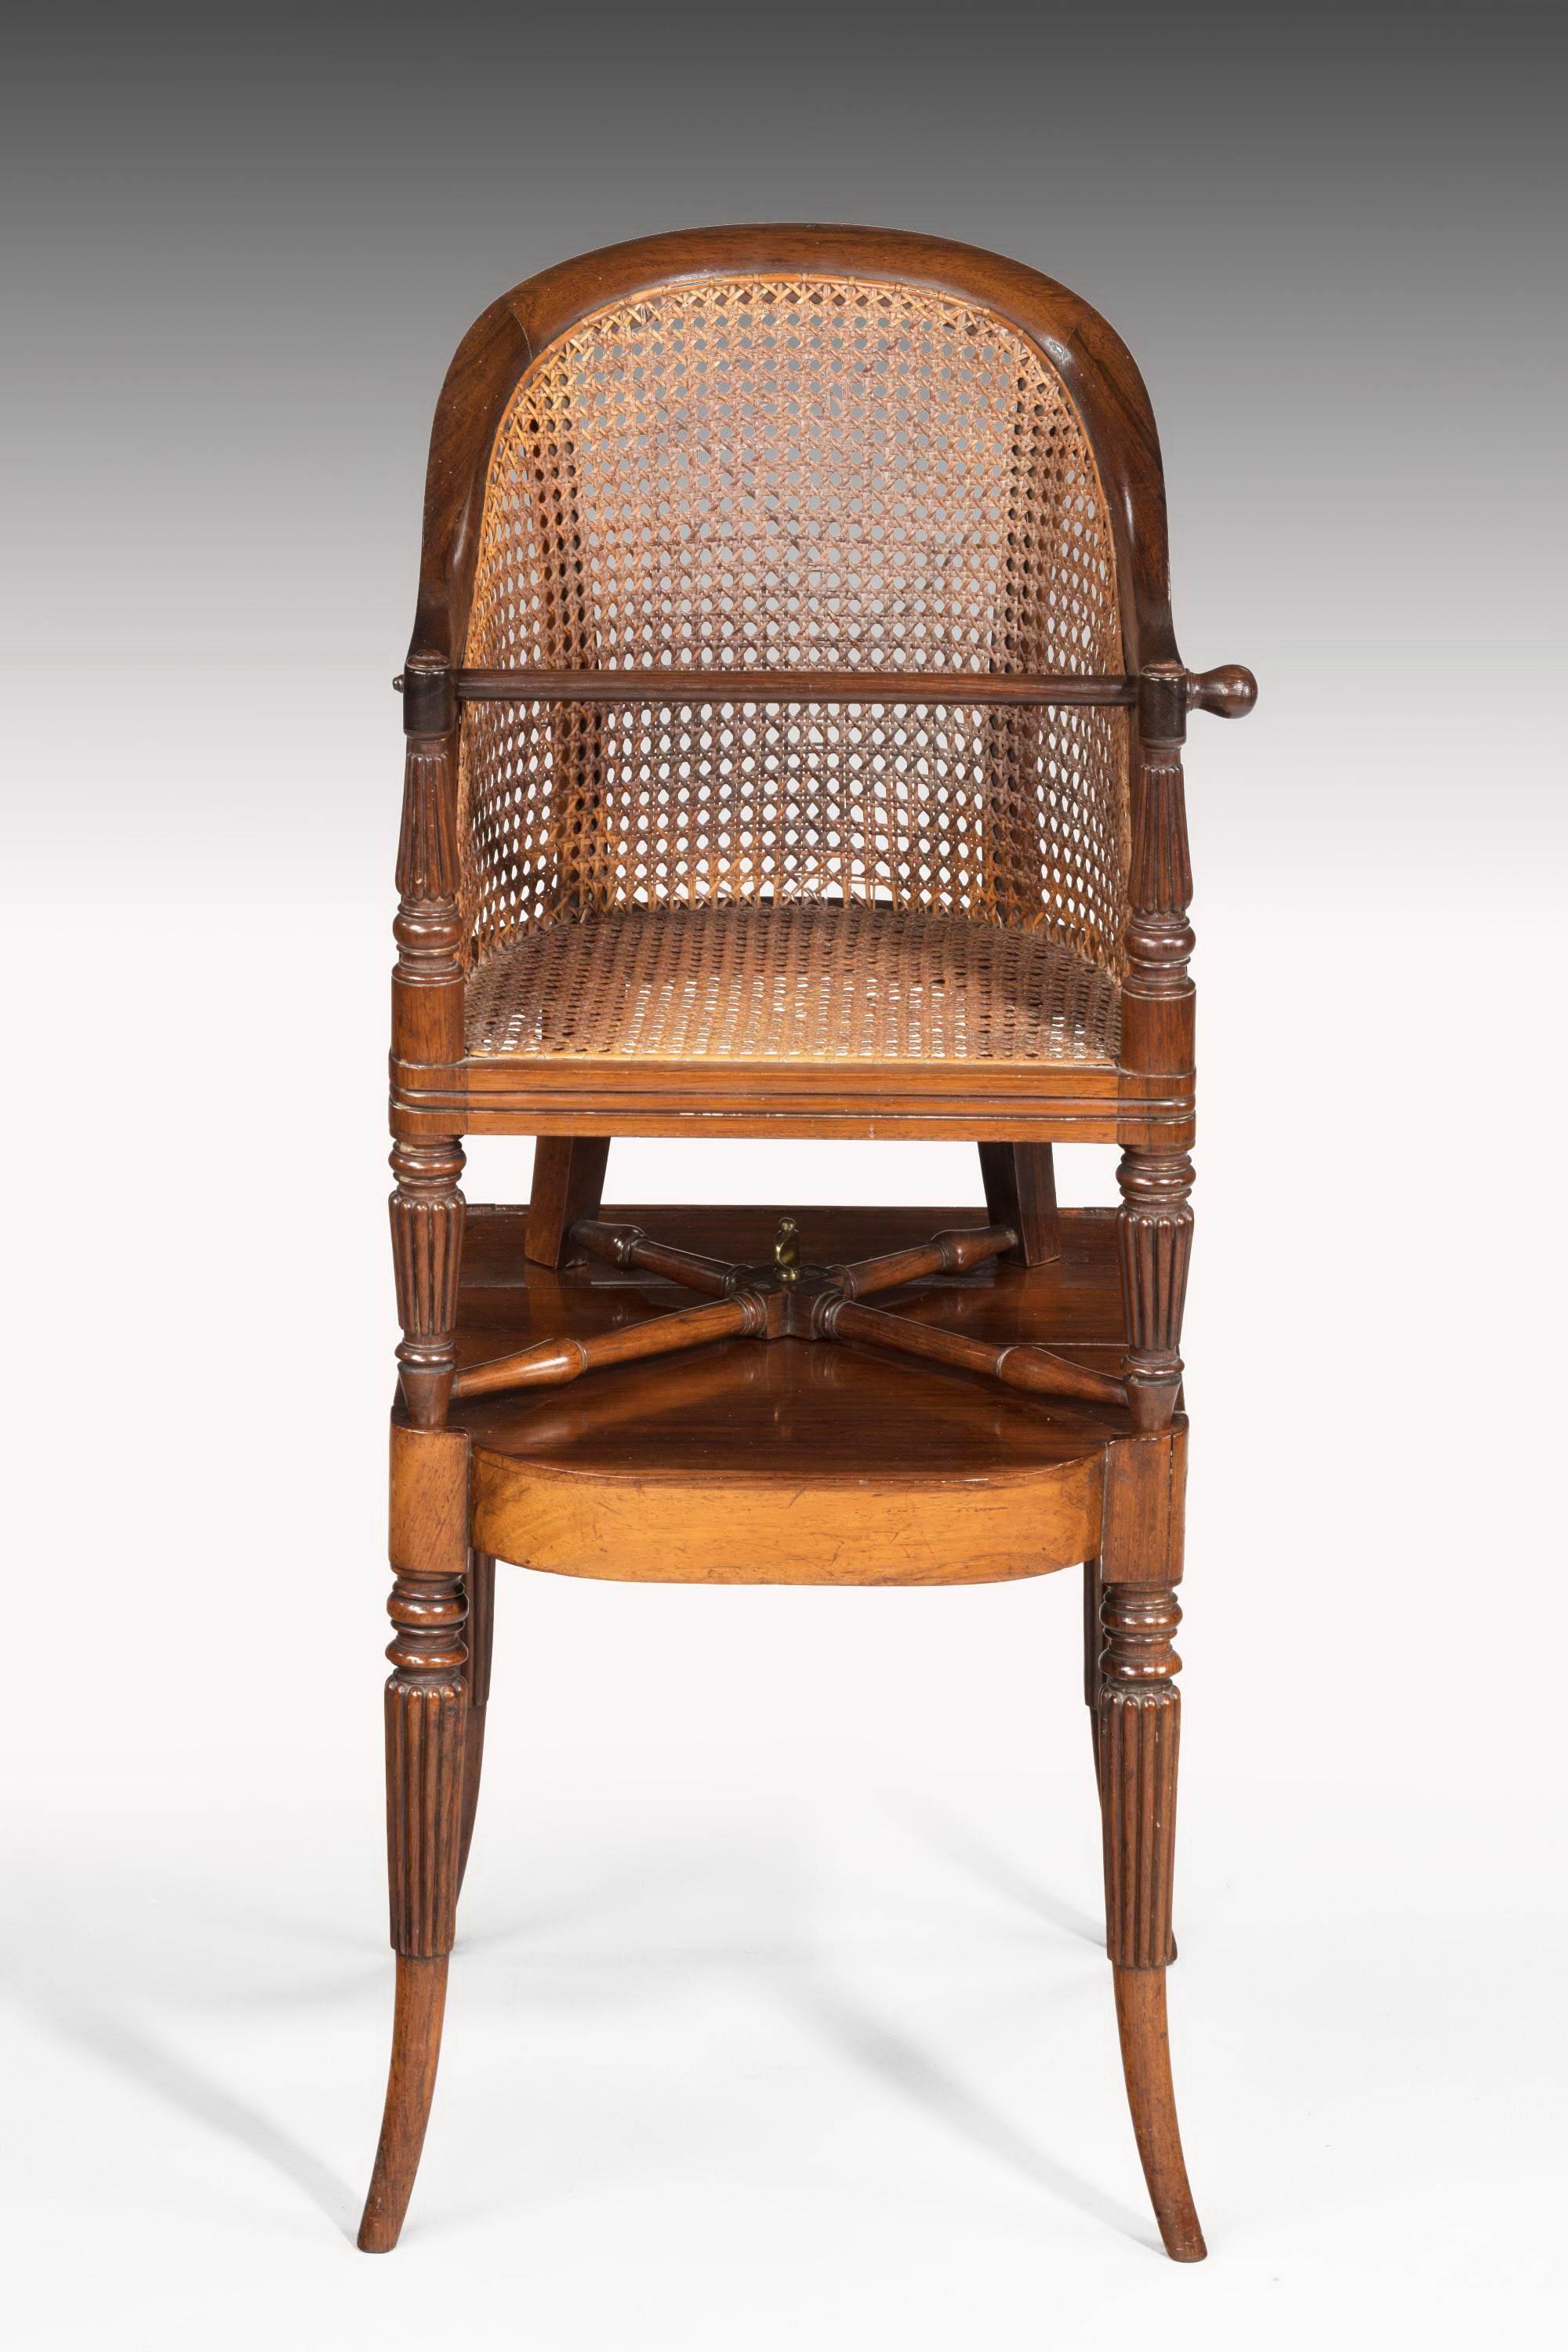 Regency Period Child's Chair on Stand 2